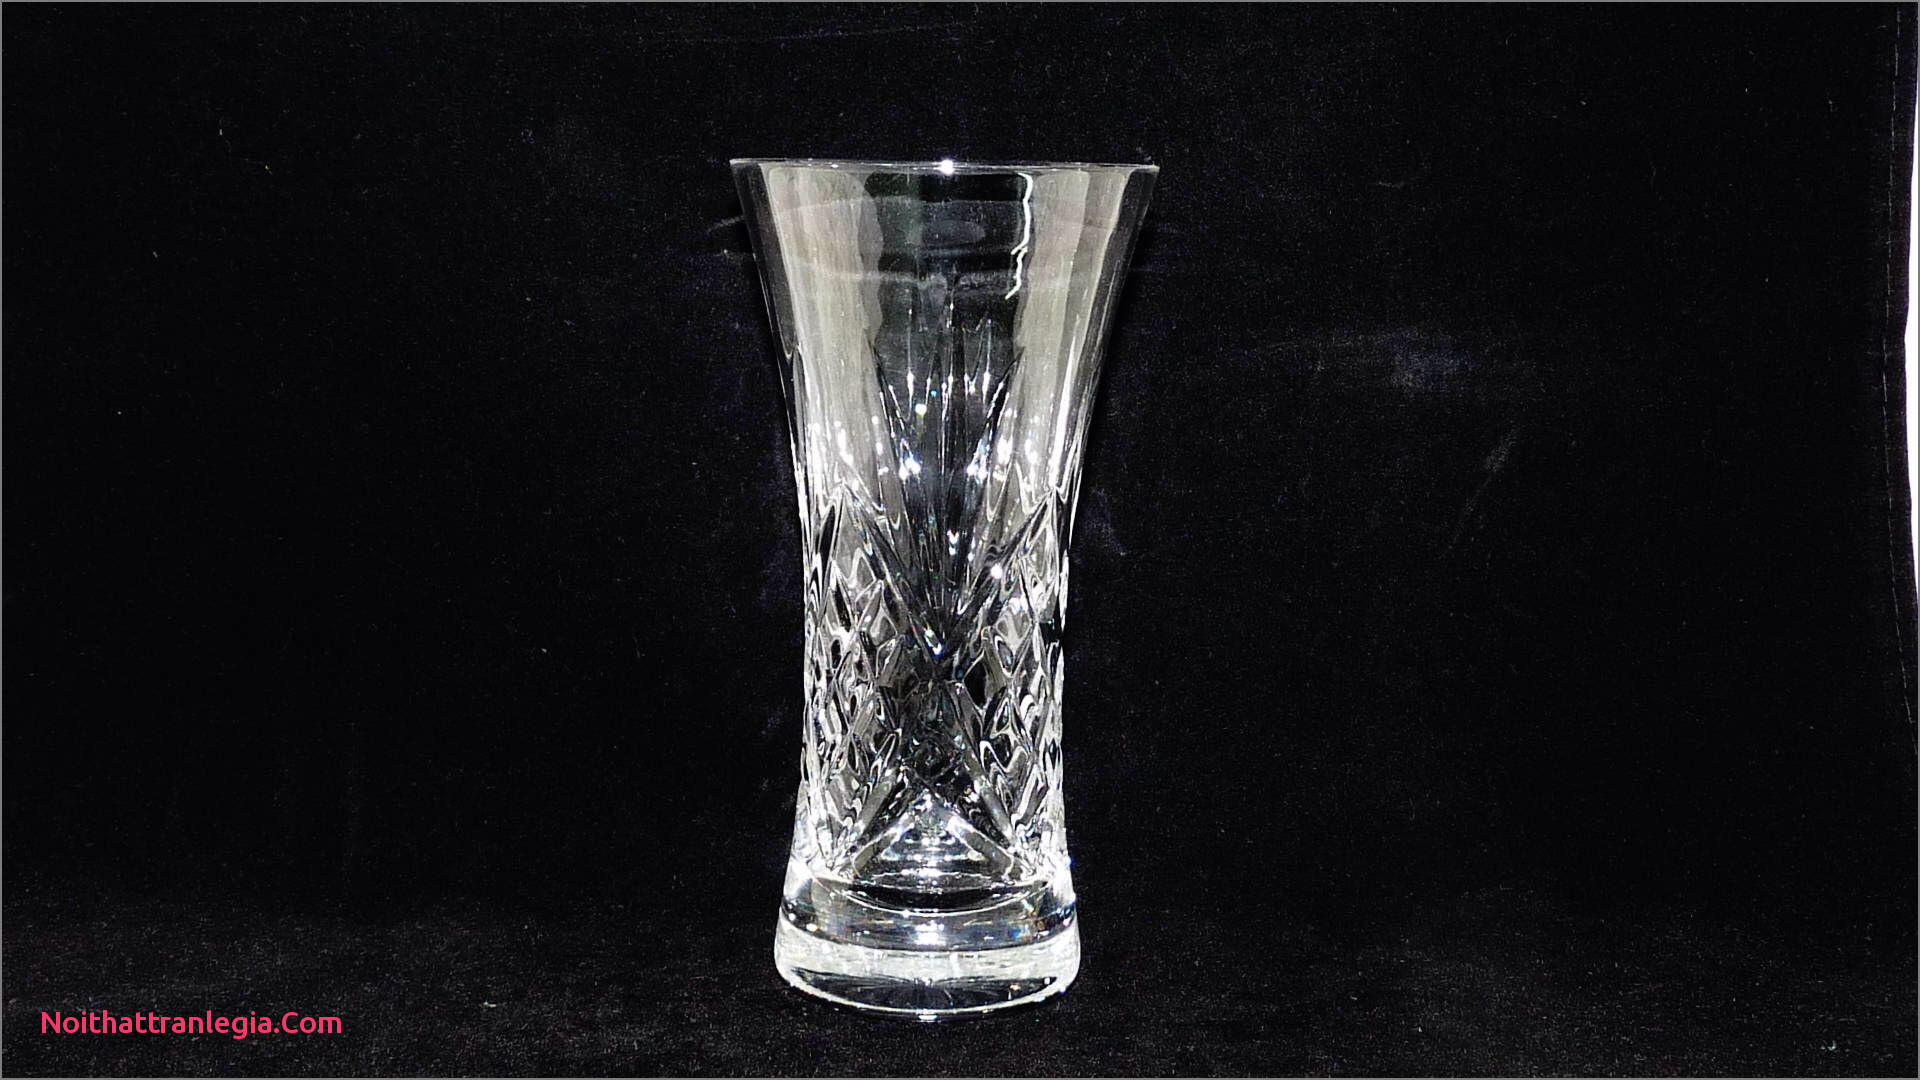 13 Lovable Vintage Czech Glass Vase 2024 free download vintage czech glass vase of 20 cut glass antique vase noithattranlegia vases design regarding excited to share the latest addition to my etsy shop small glass vase